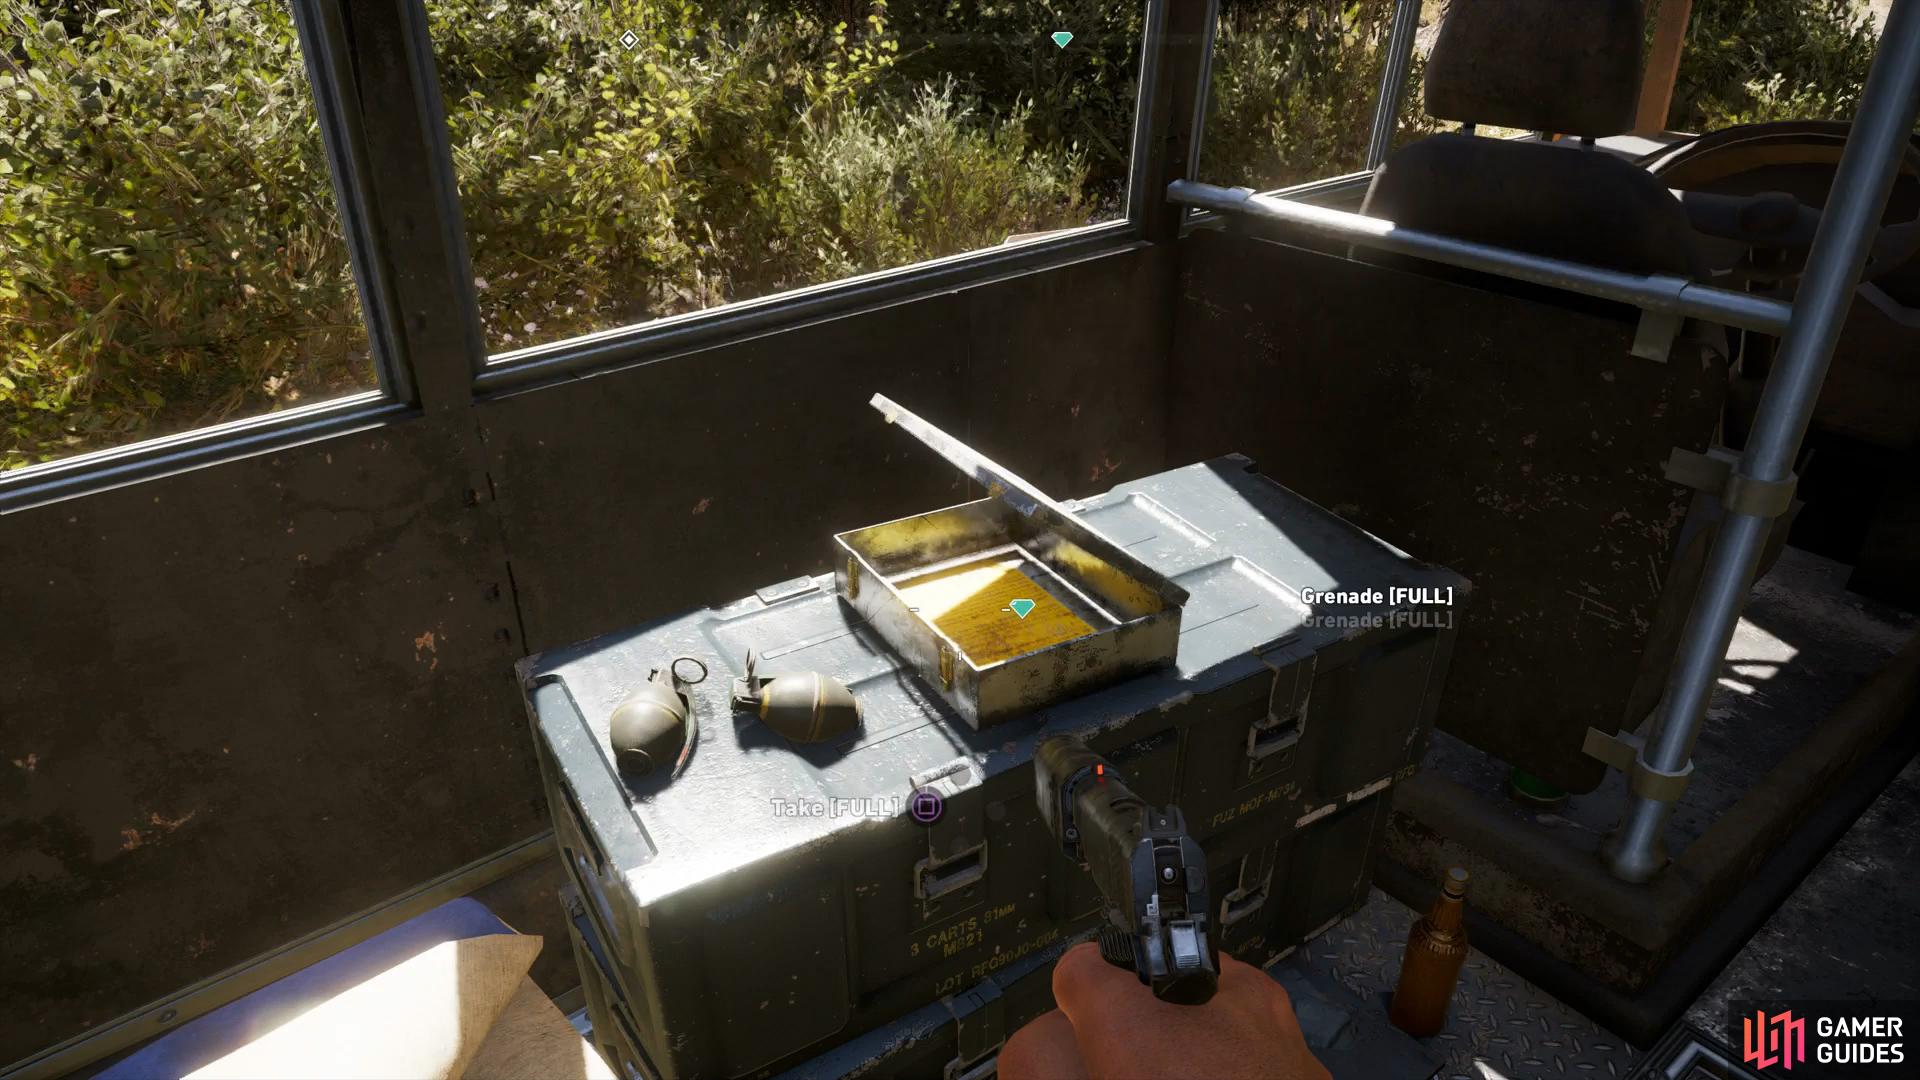 the Prepper note is inside the bus itself